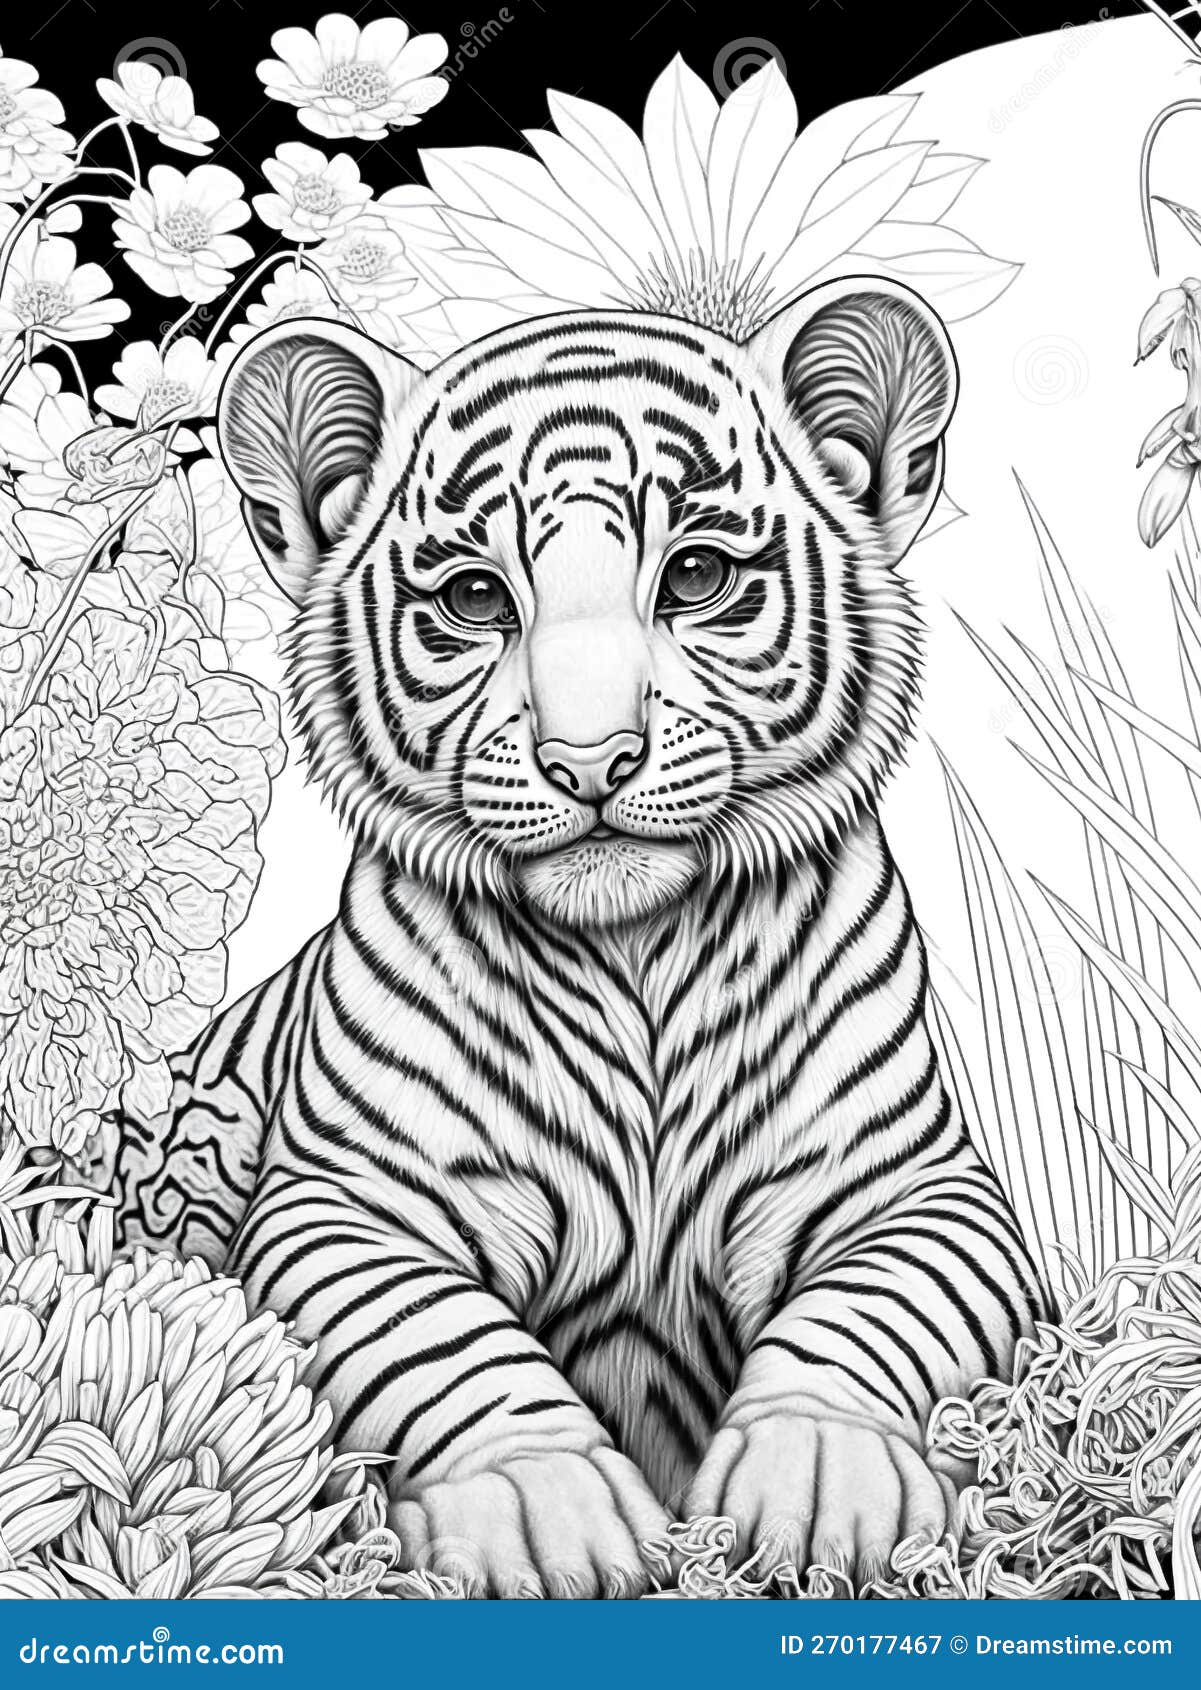 Little tiger portrait coloring page flowers background cute baby animal black and white illustration ink drawing stock illustration